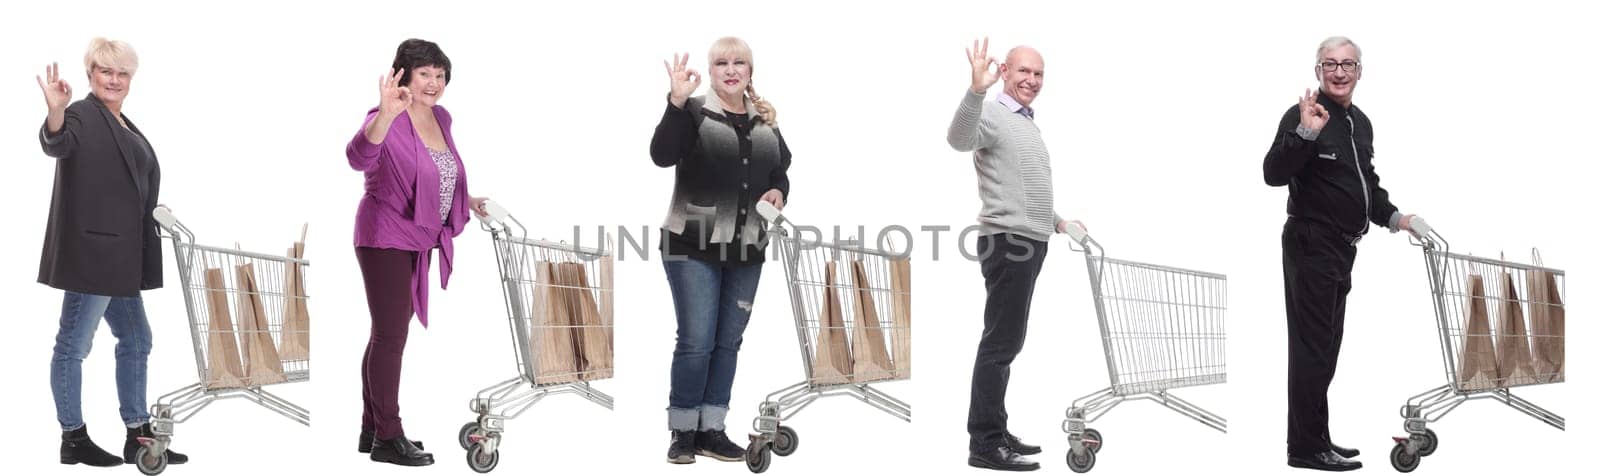 group of people in profile with shopping cart isolated on white background